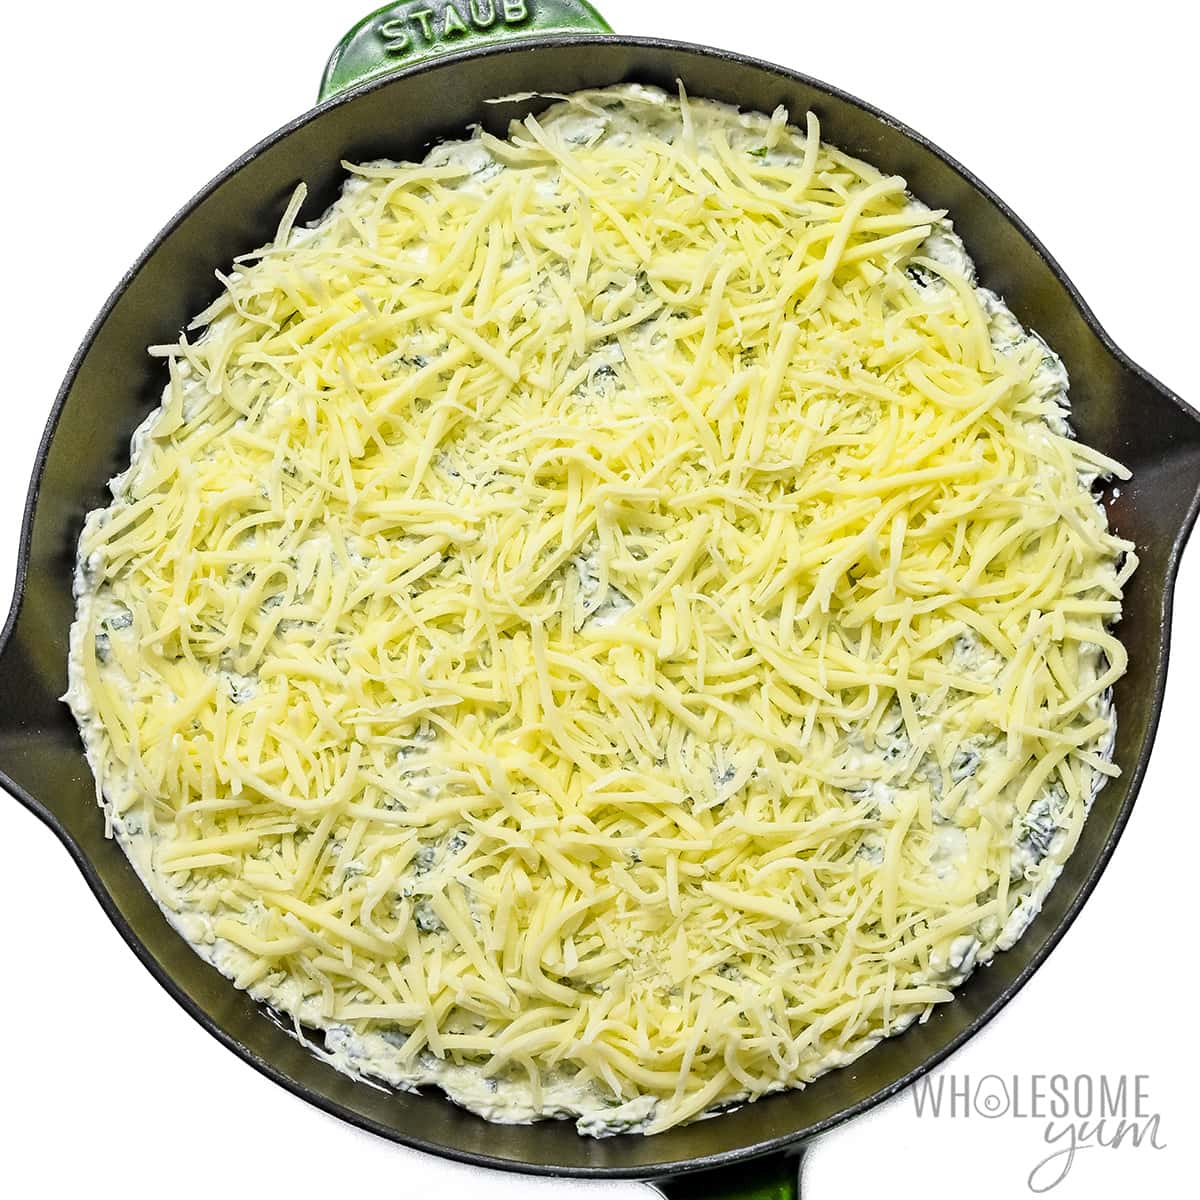 Shredded cheese layered on top of spinach mixture.